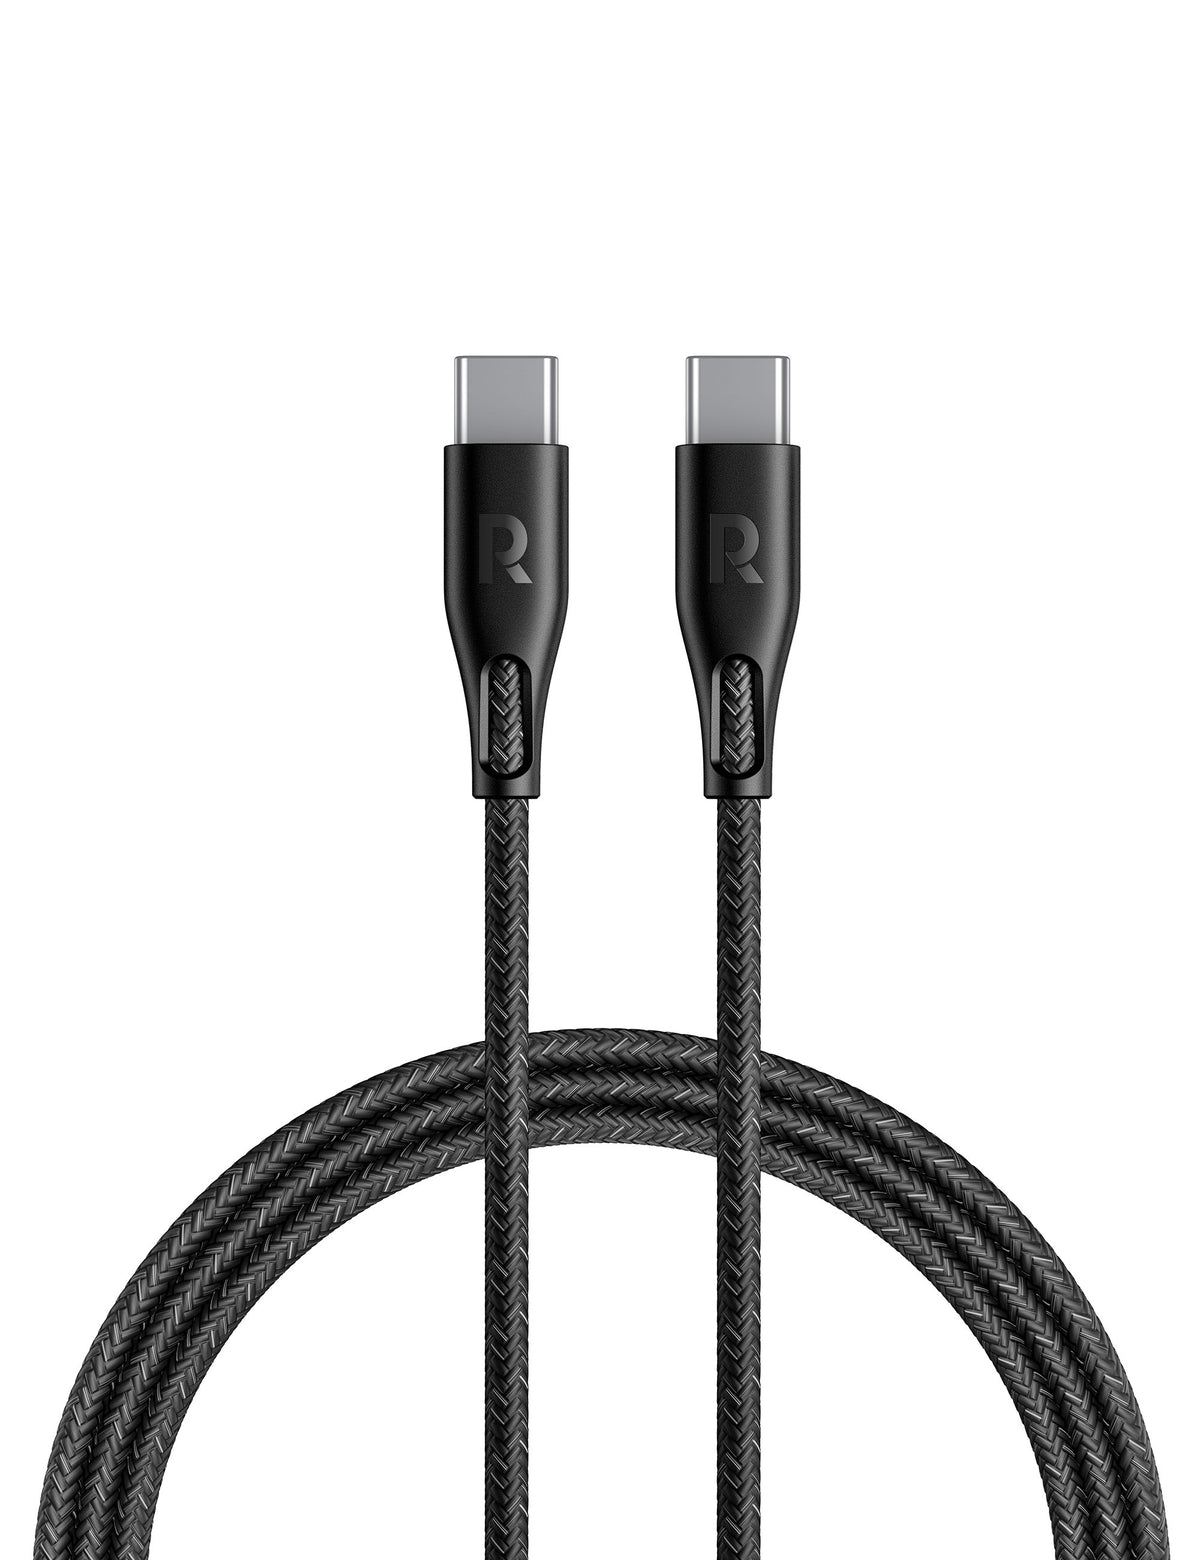 Cable tipo c a tipo c de 4 pies (1.21 m) get power